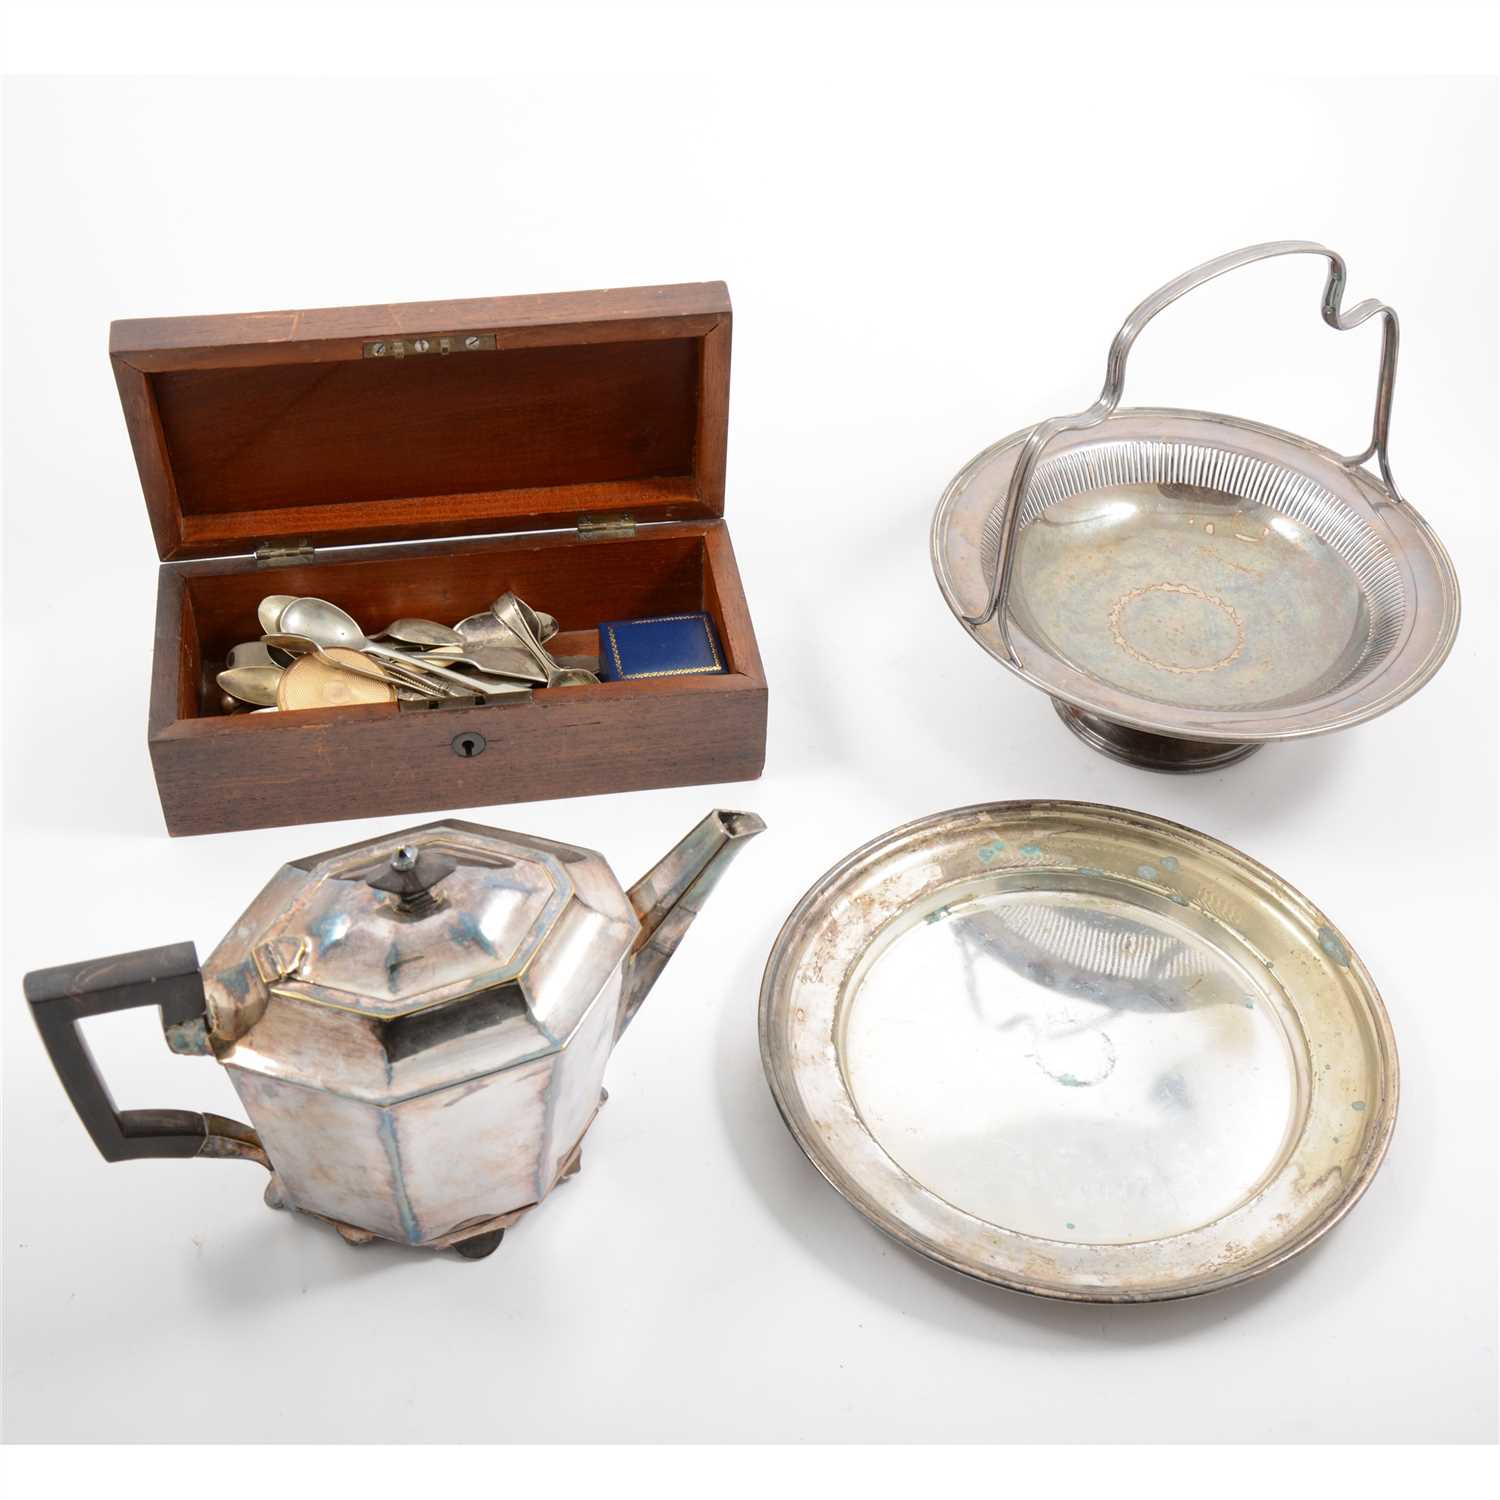 Lot 90 - A silver champagne coupe by Charles Boyton & Son Ltd, London 1907, approx. 4.3oz, and other plated-wares